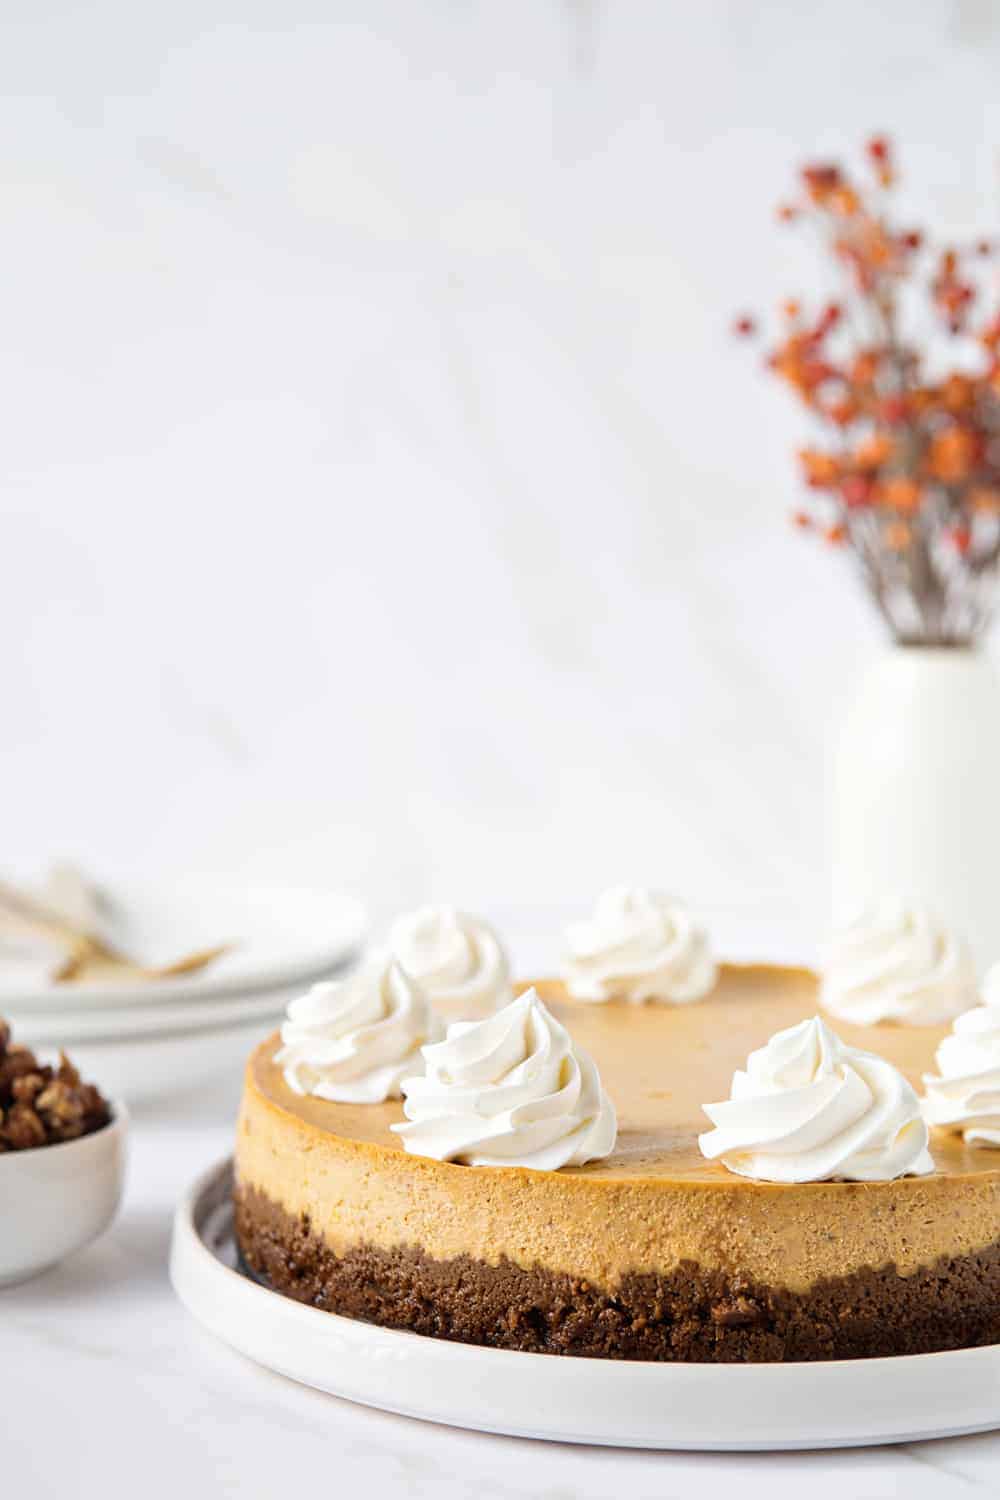 Pumpkin Praline Cheesecake combines sweet praline pecans with creamy pumpkin cheesecake and a gingersnap crust. Perfect for Thanksgiving.